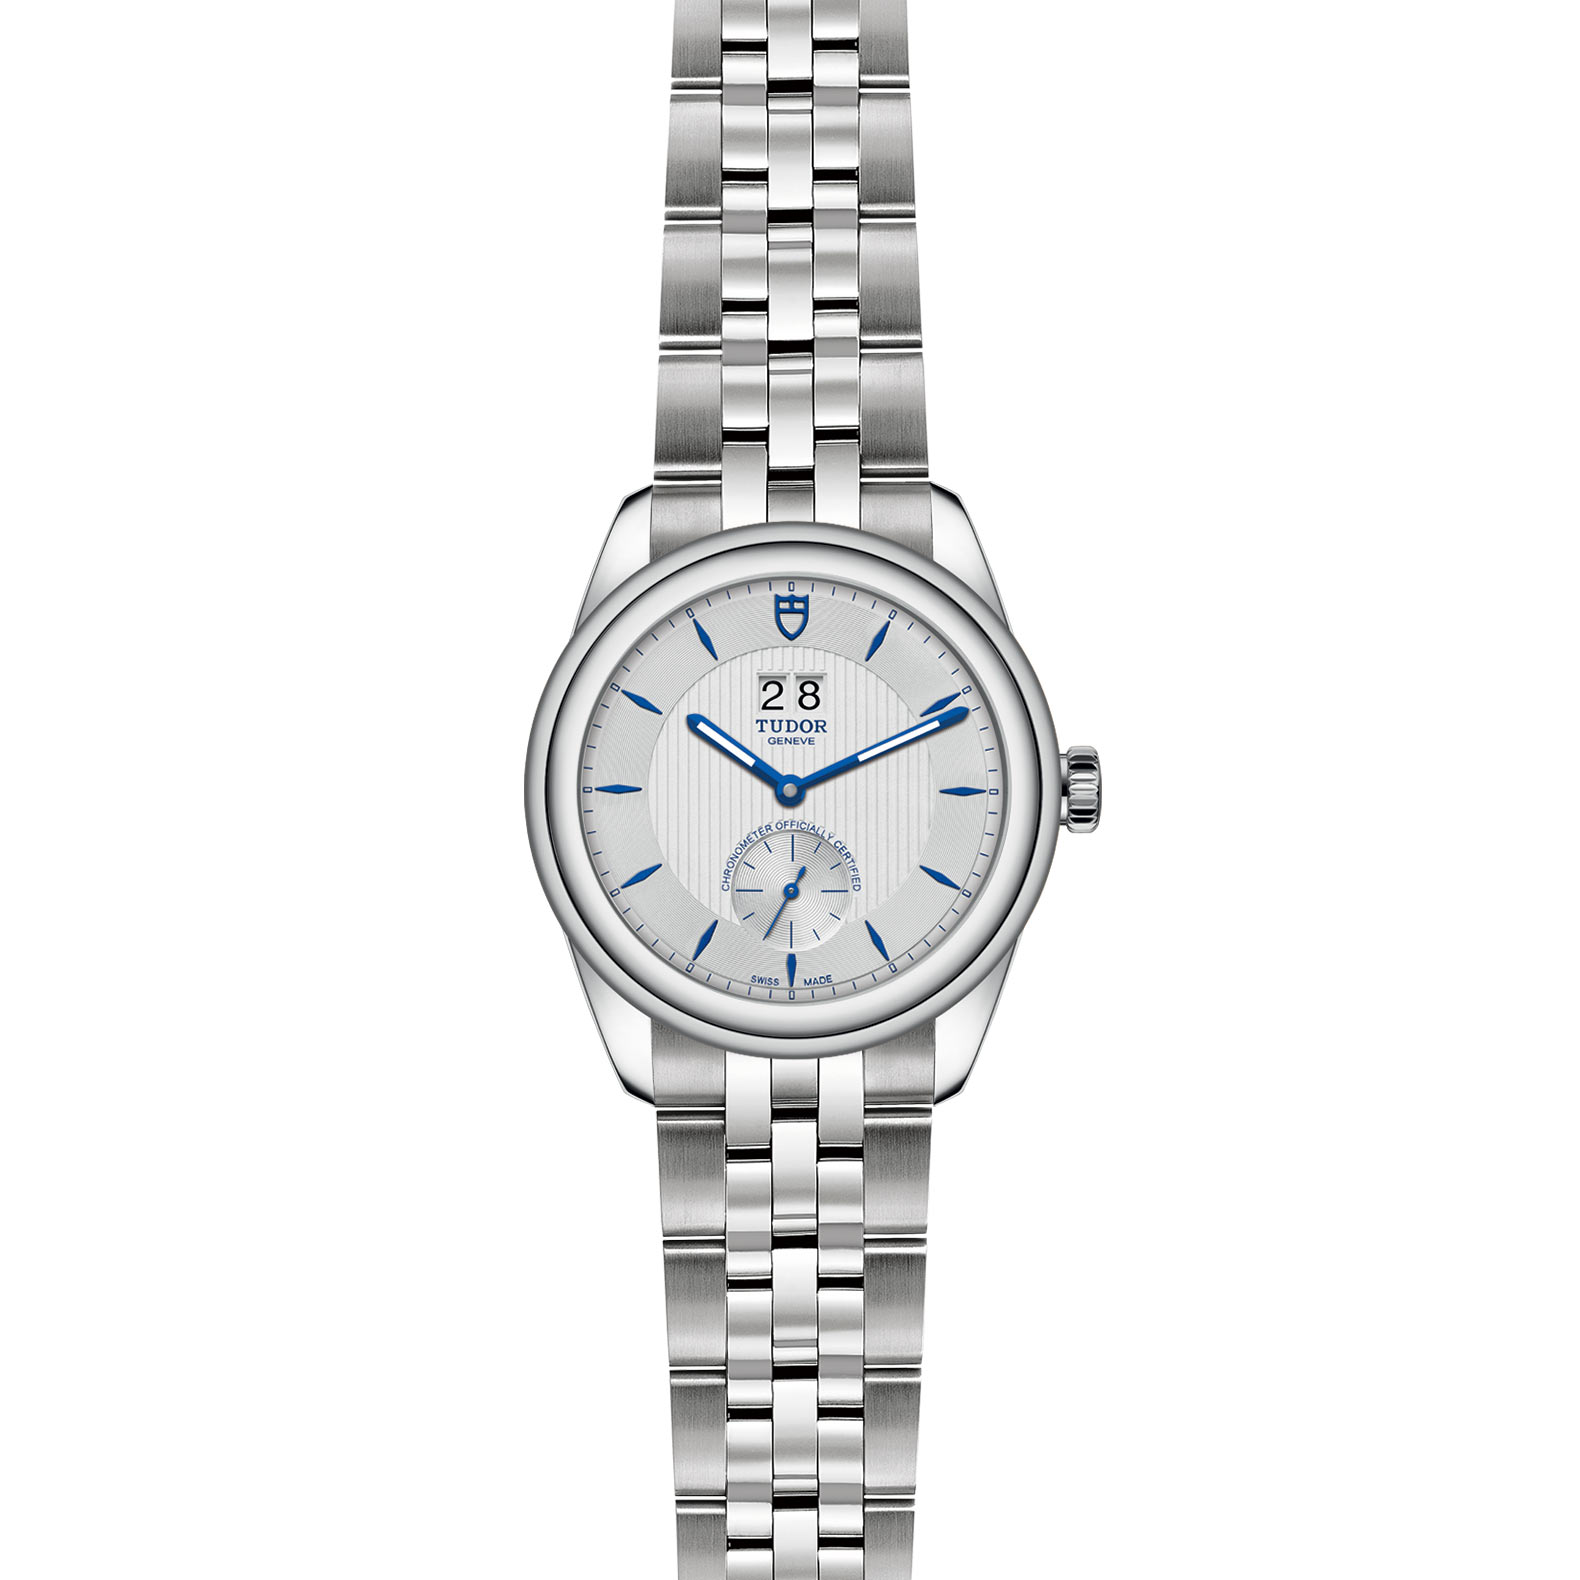 TUDOR Glamour Double Date M57100 0001 Frontfacing